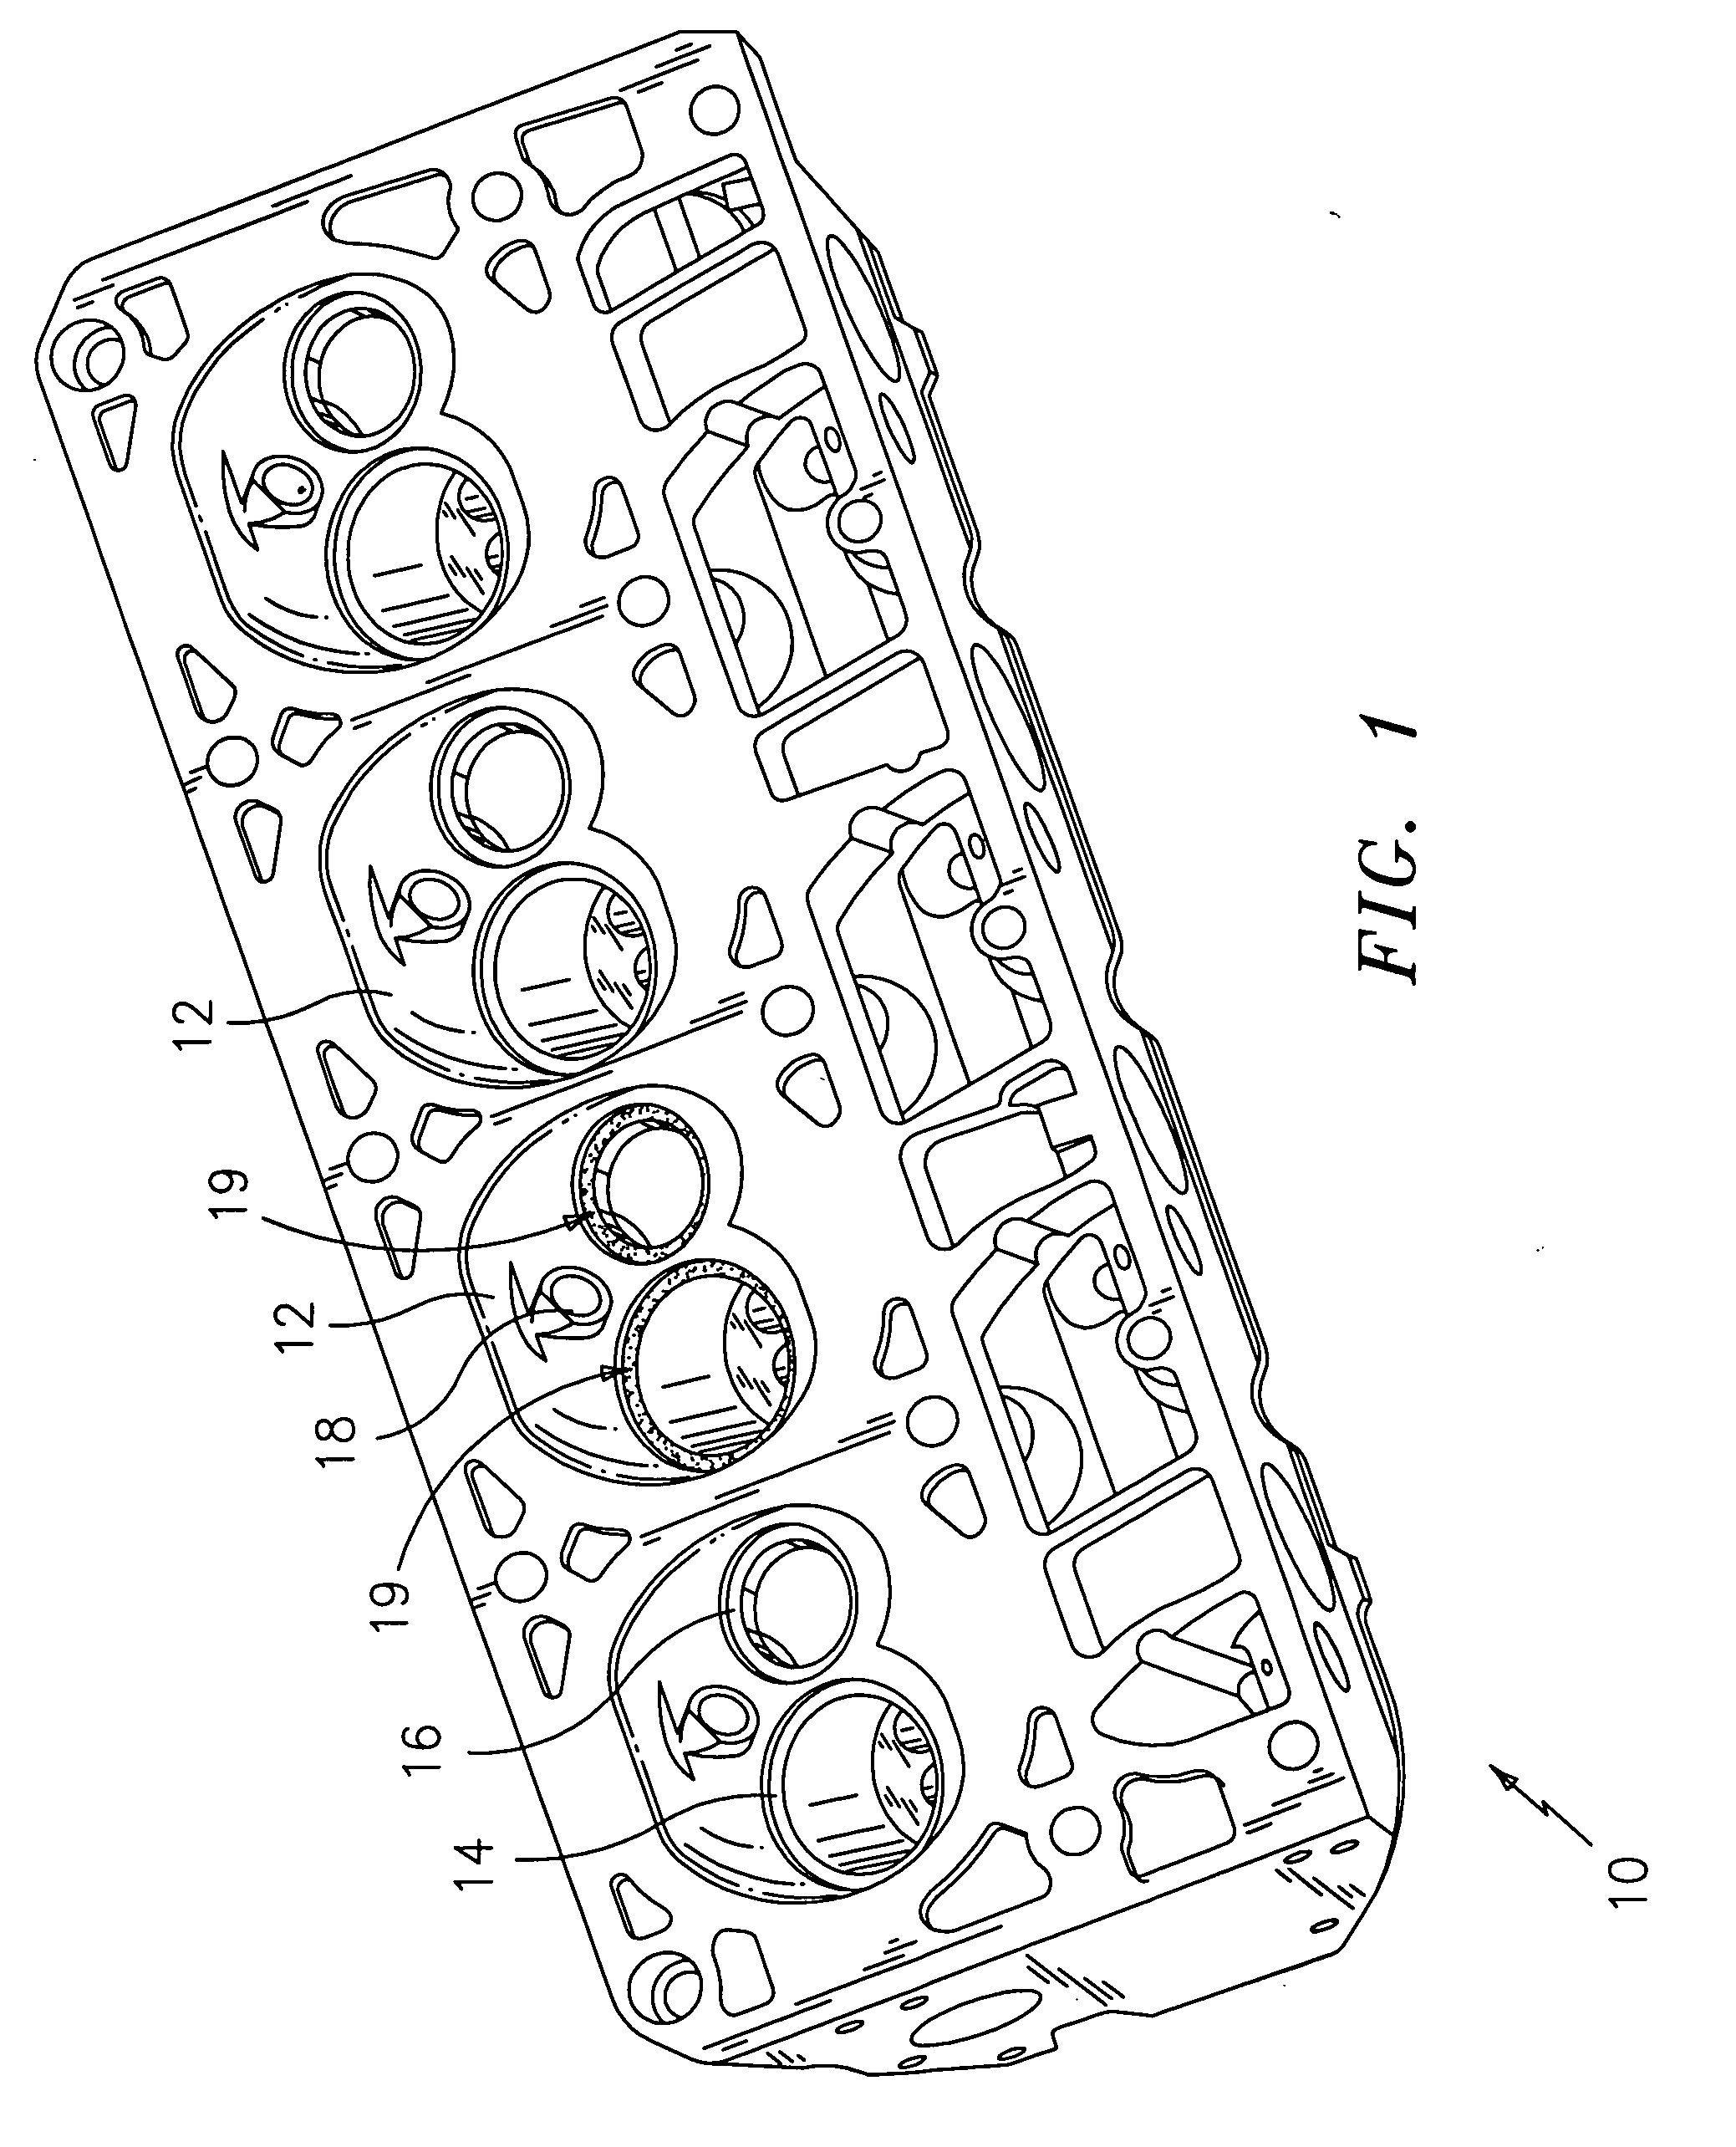 Method and system for laser cladding